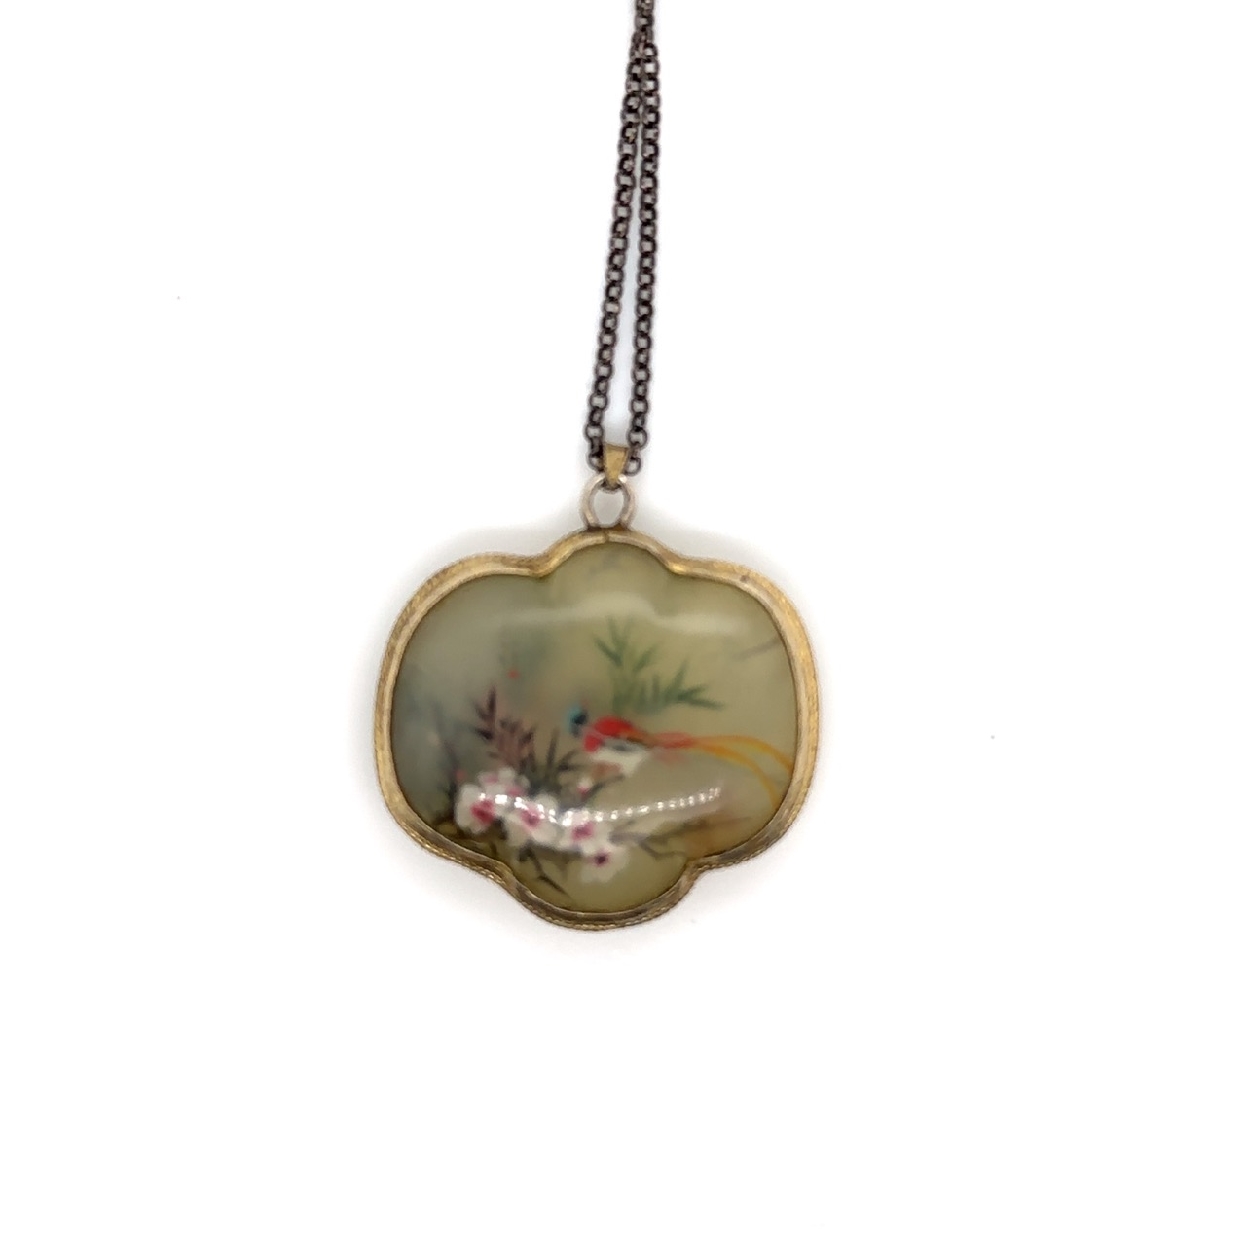 Antique Silver and Glass Pendant with Painted Birds and Flowers